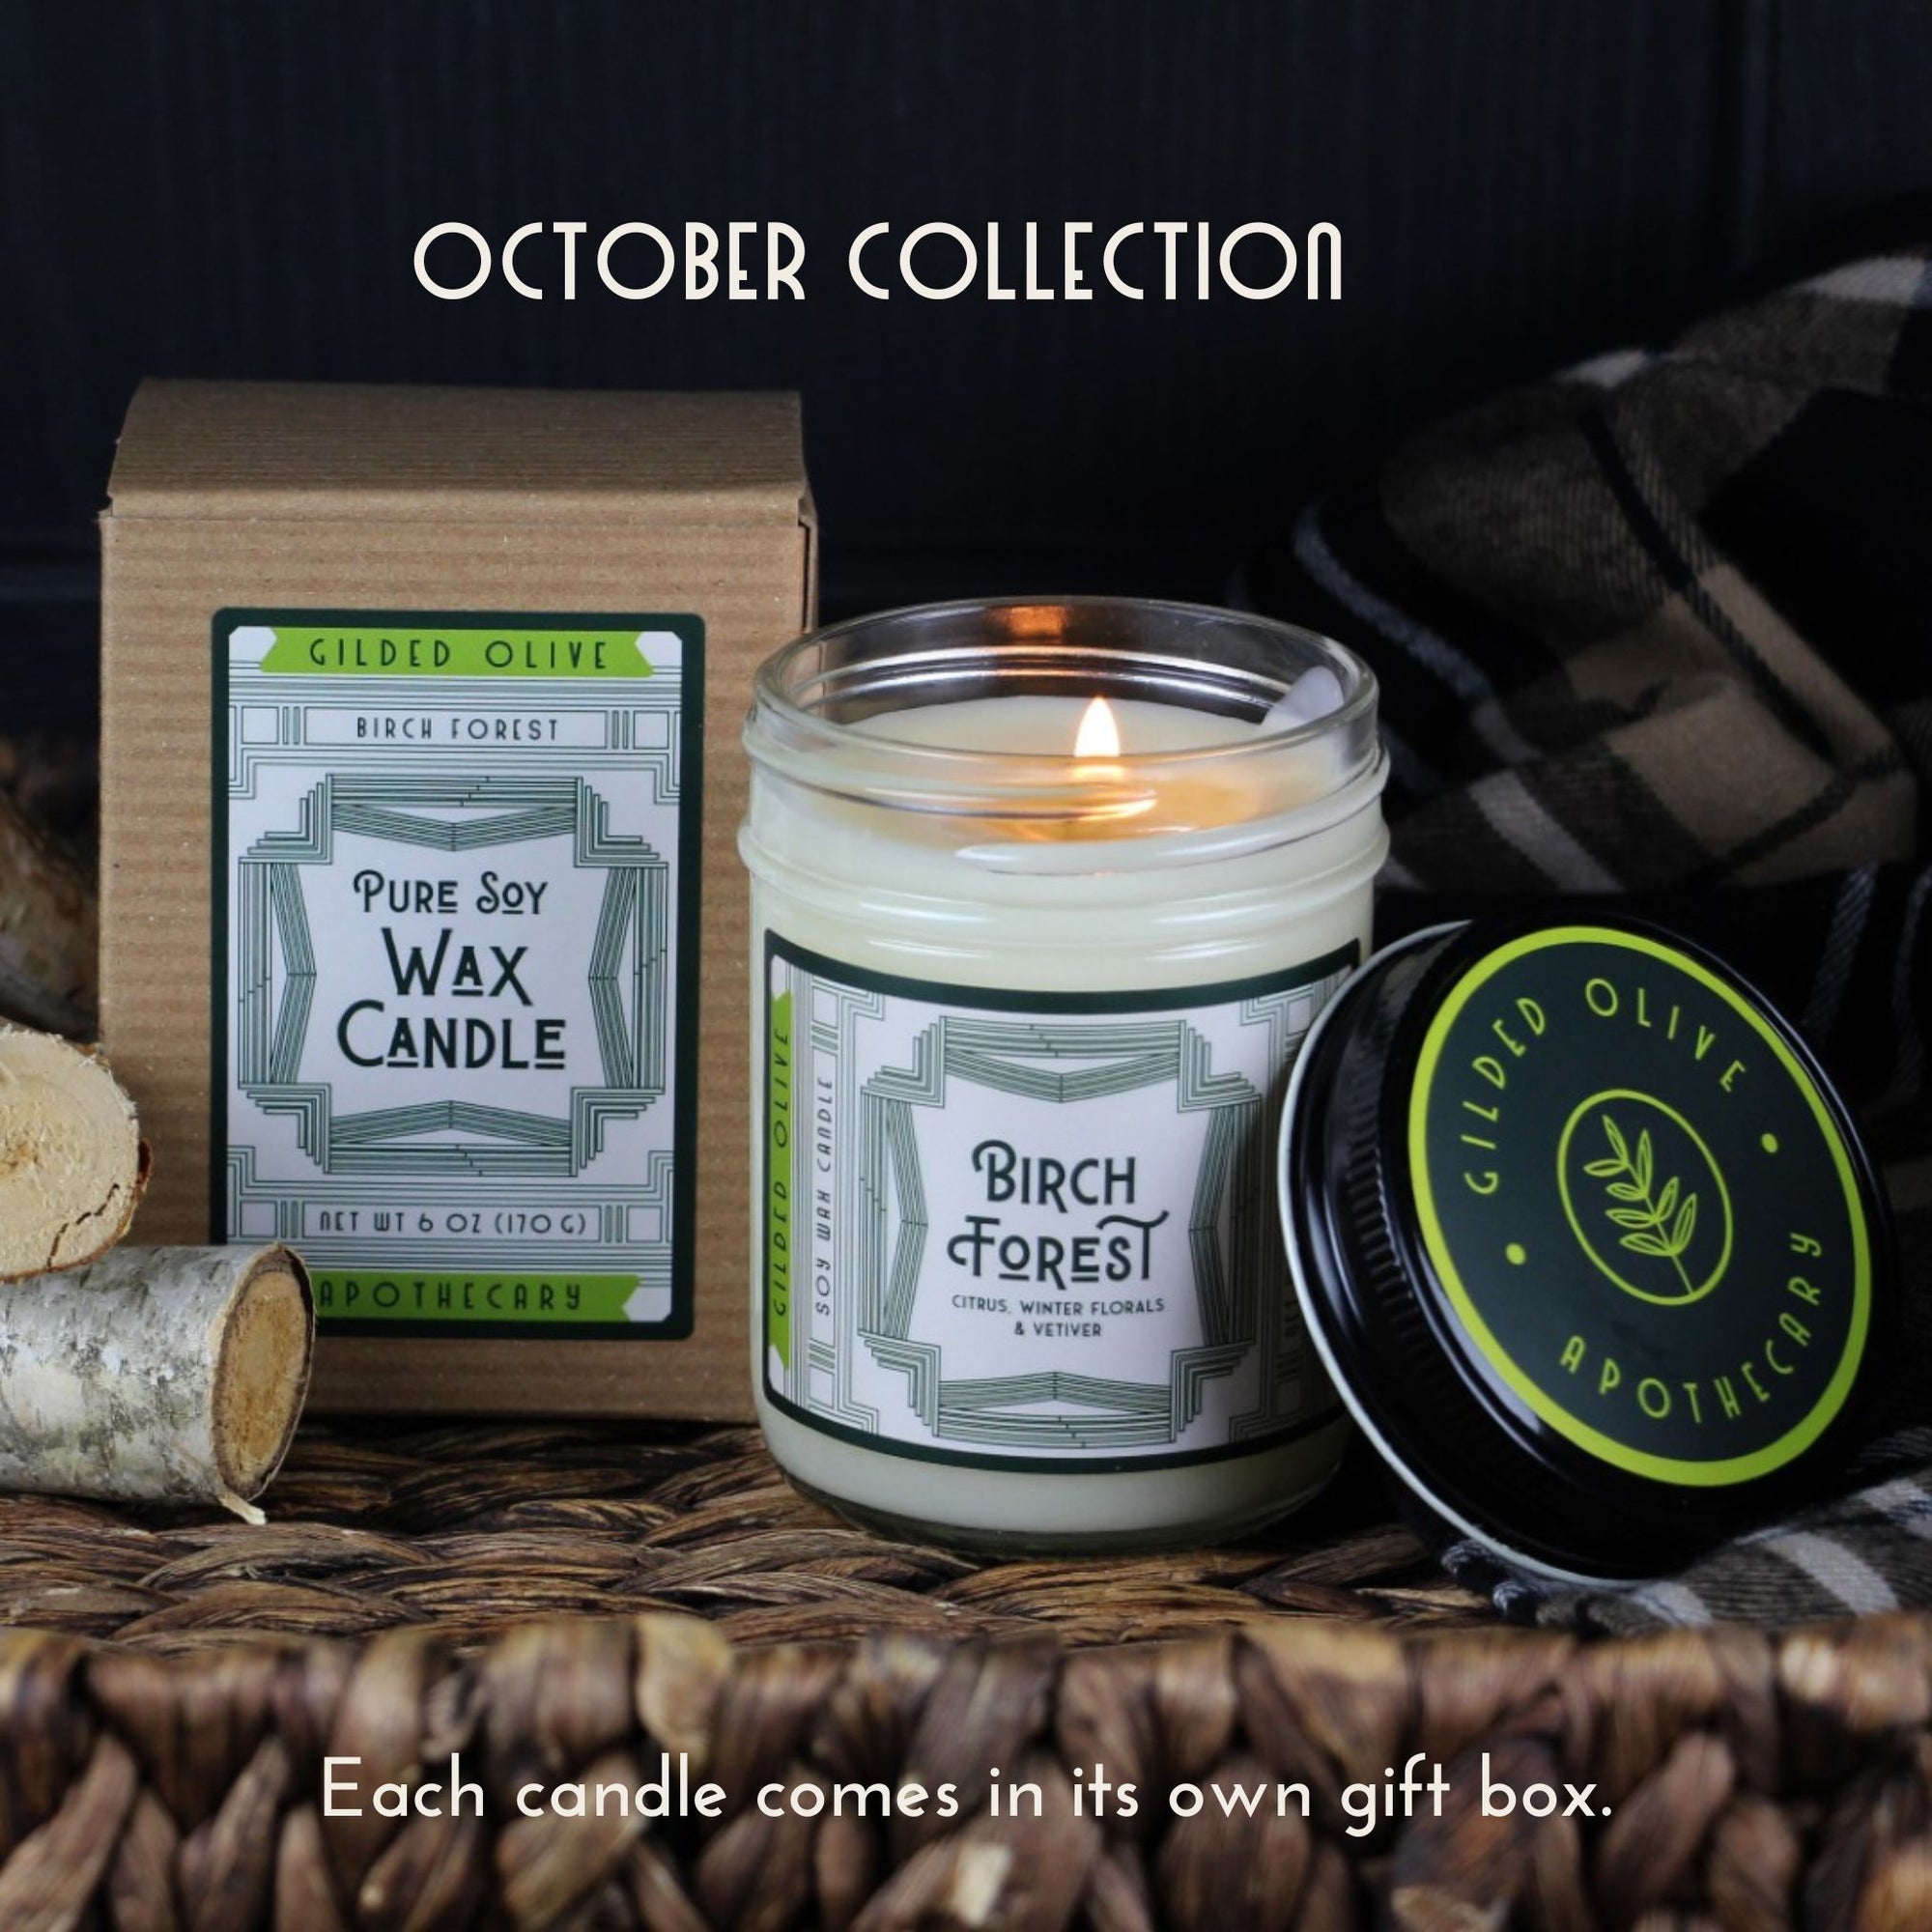 Soy Candle & matching gift box